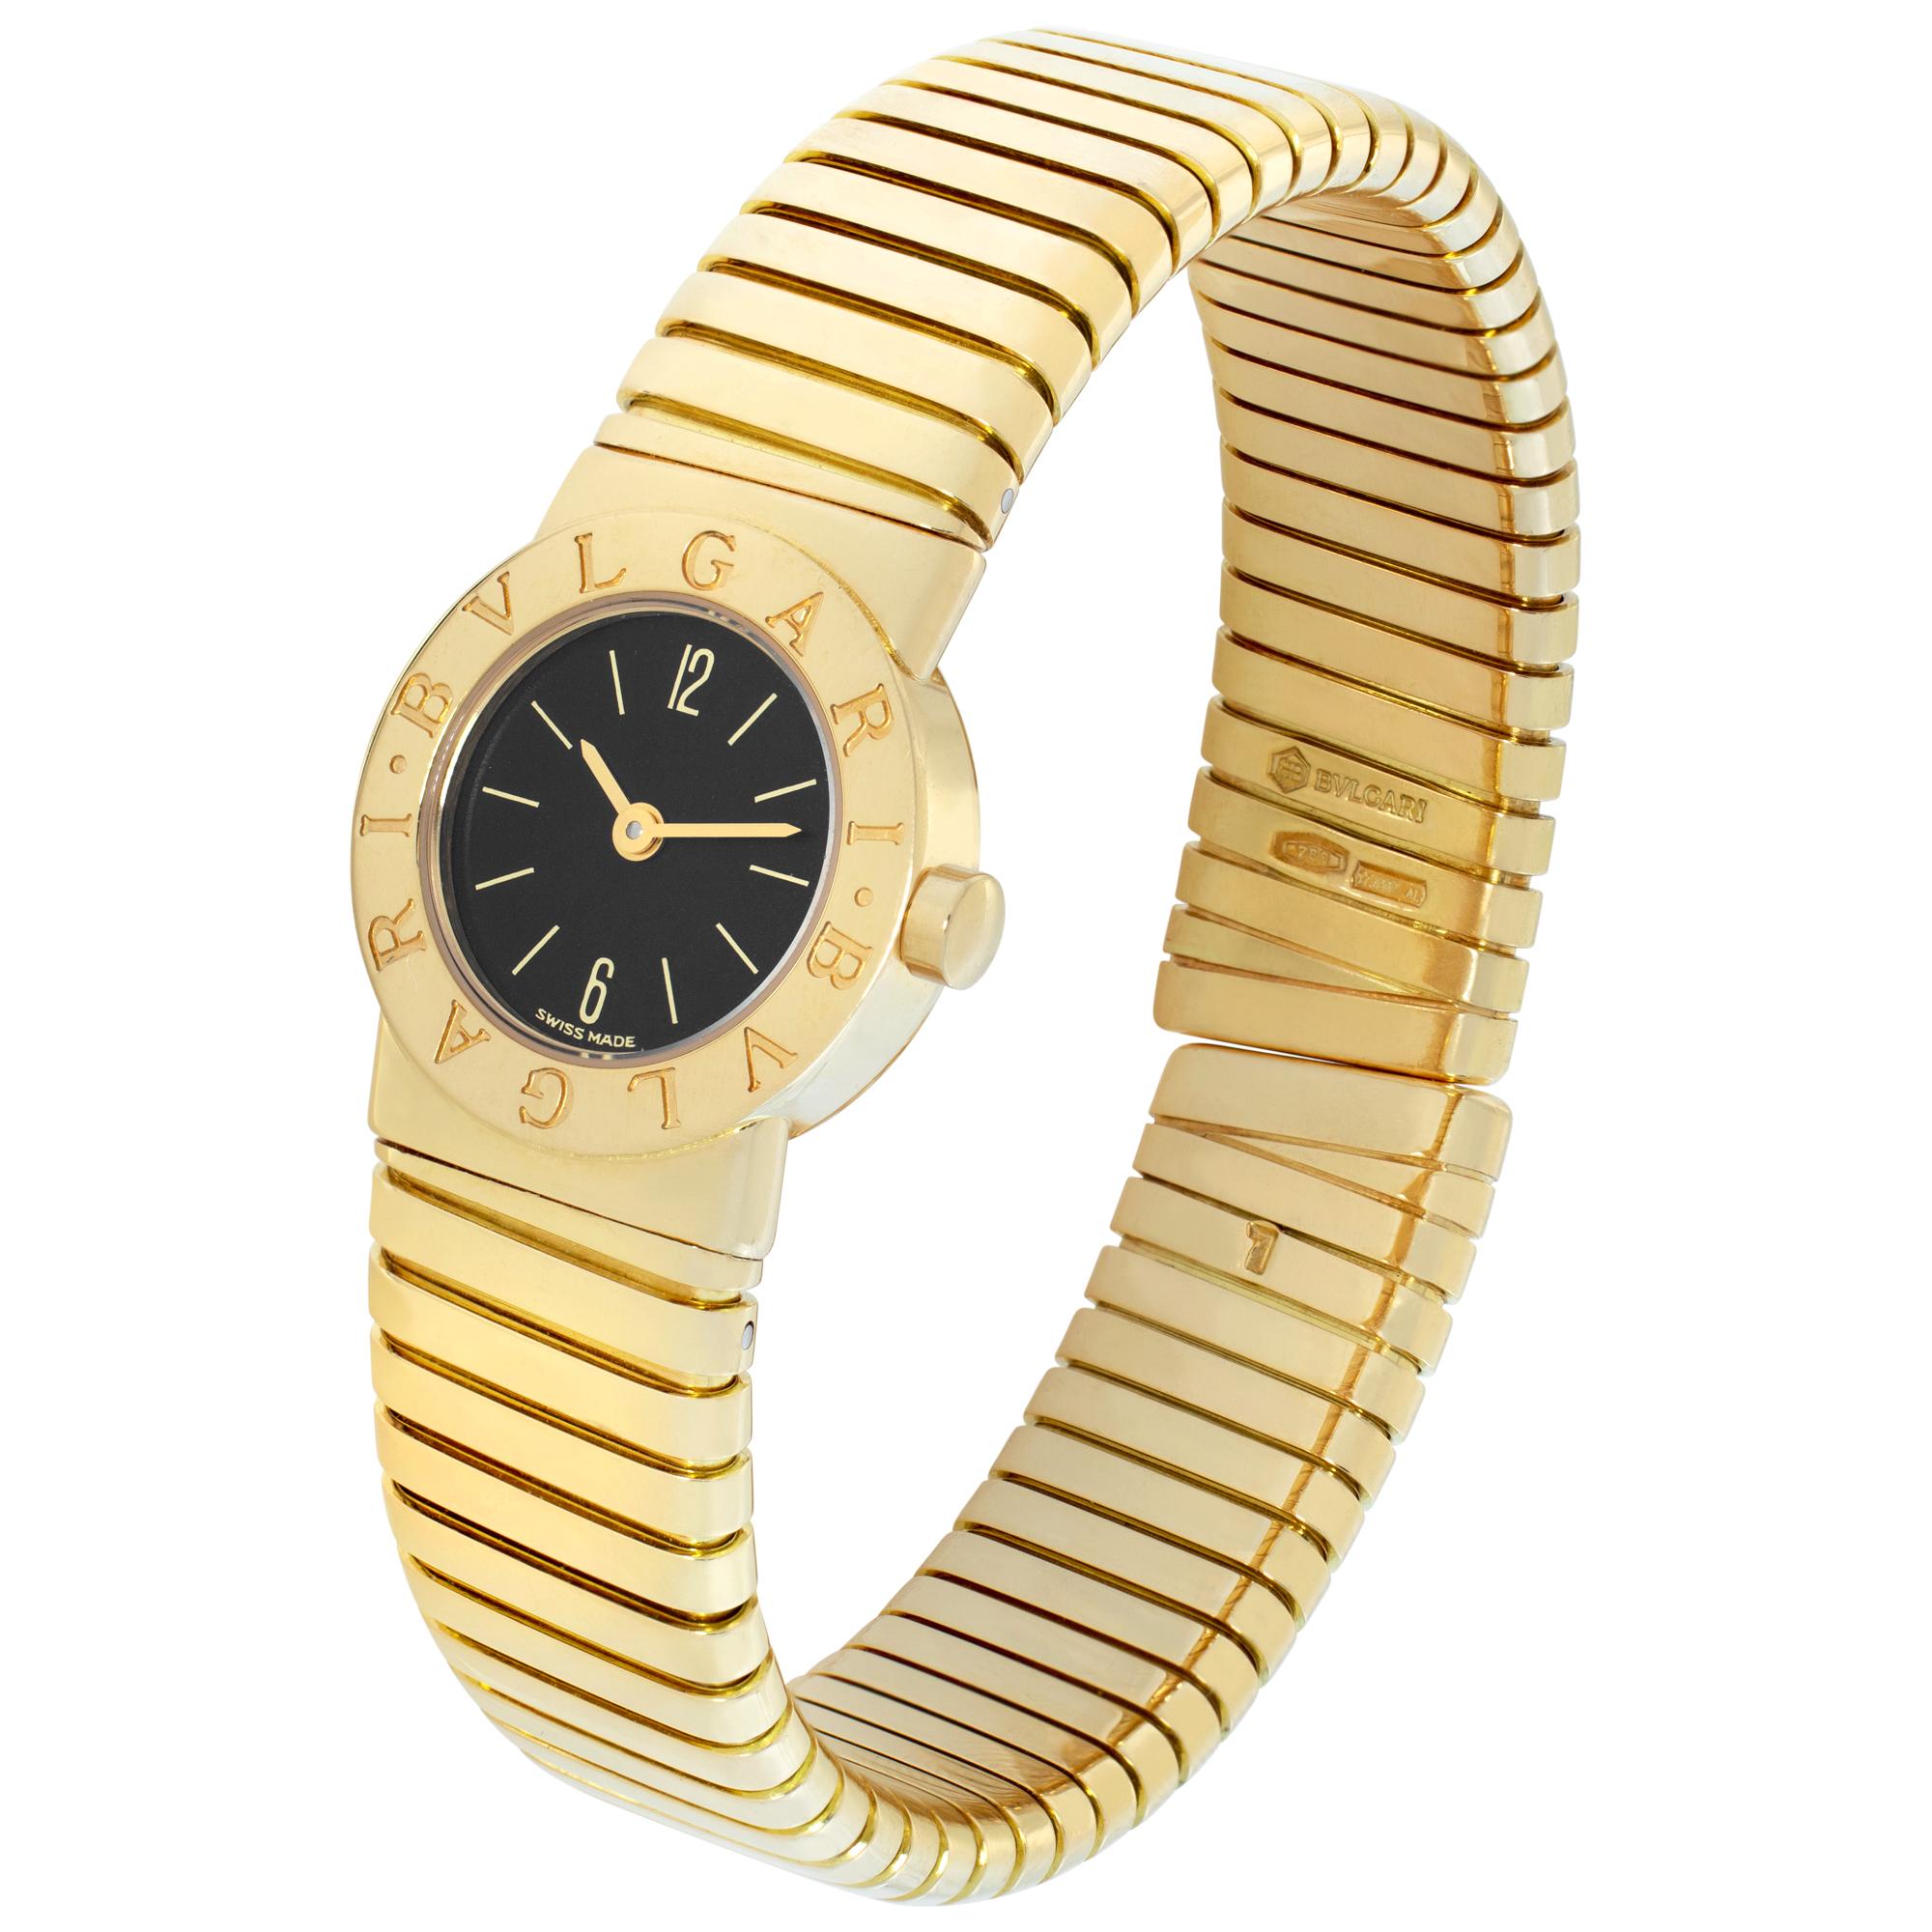 Bvlgari Tubogas in 18k yellow gold. Quartz. Comes with box, papers and recent Bvlgari factory service documents. Circa 1988. 19 mm case size. Ref bb192t. Fine Pre-owned Bvlgari / Bulgari Watch. Certified preowned Dress Bvlgari Tubogas bb192t watch